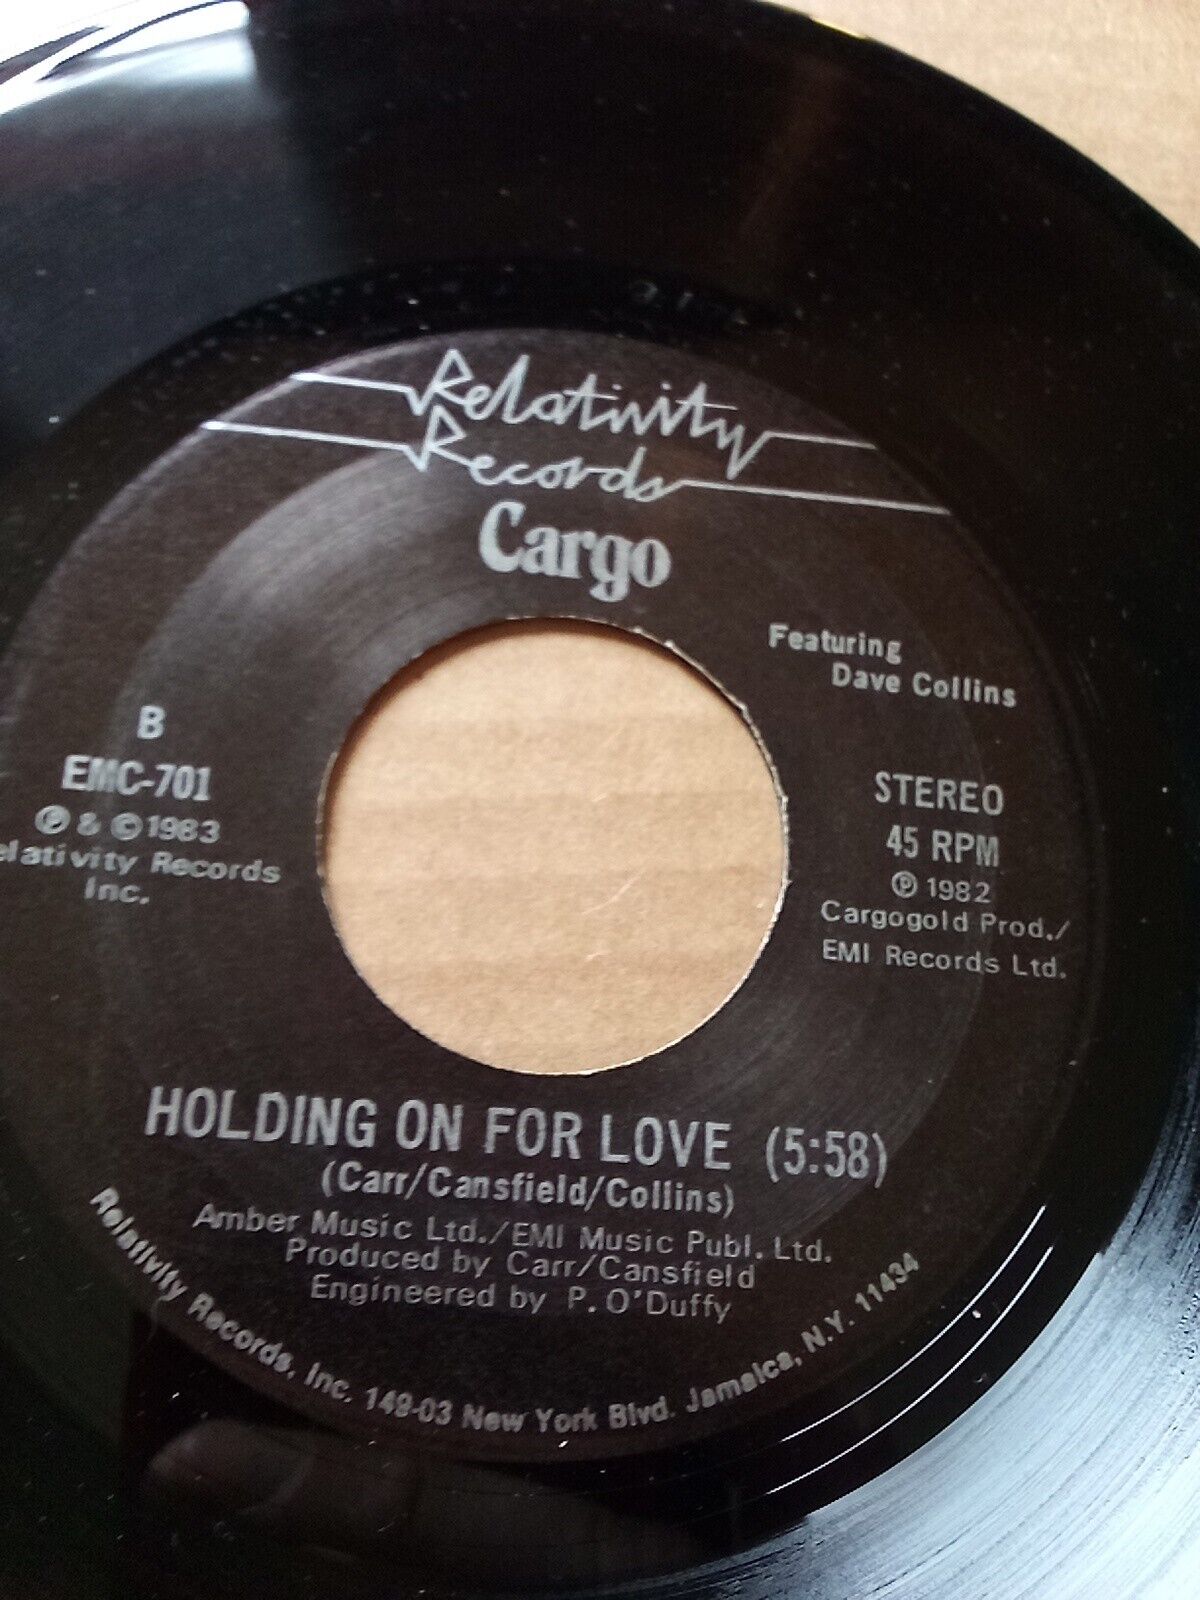 Cargo relativity records Holding On For Love 45RPM vinyl 45RPM. 7" 